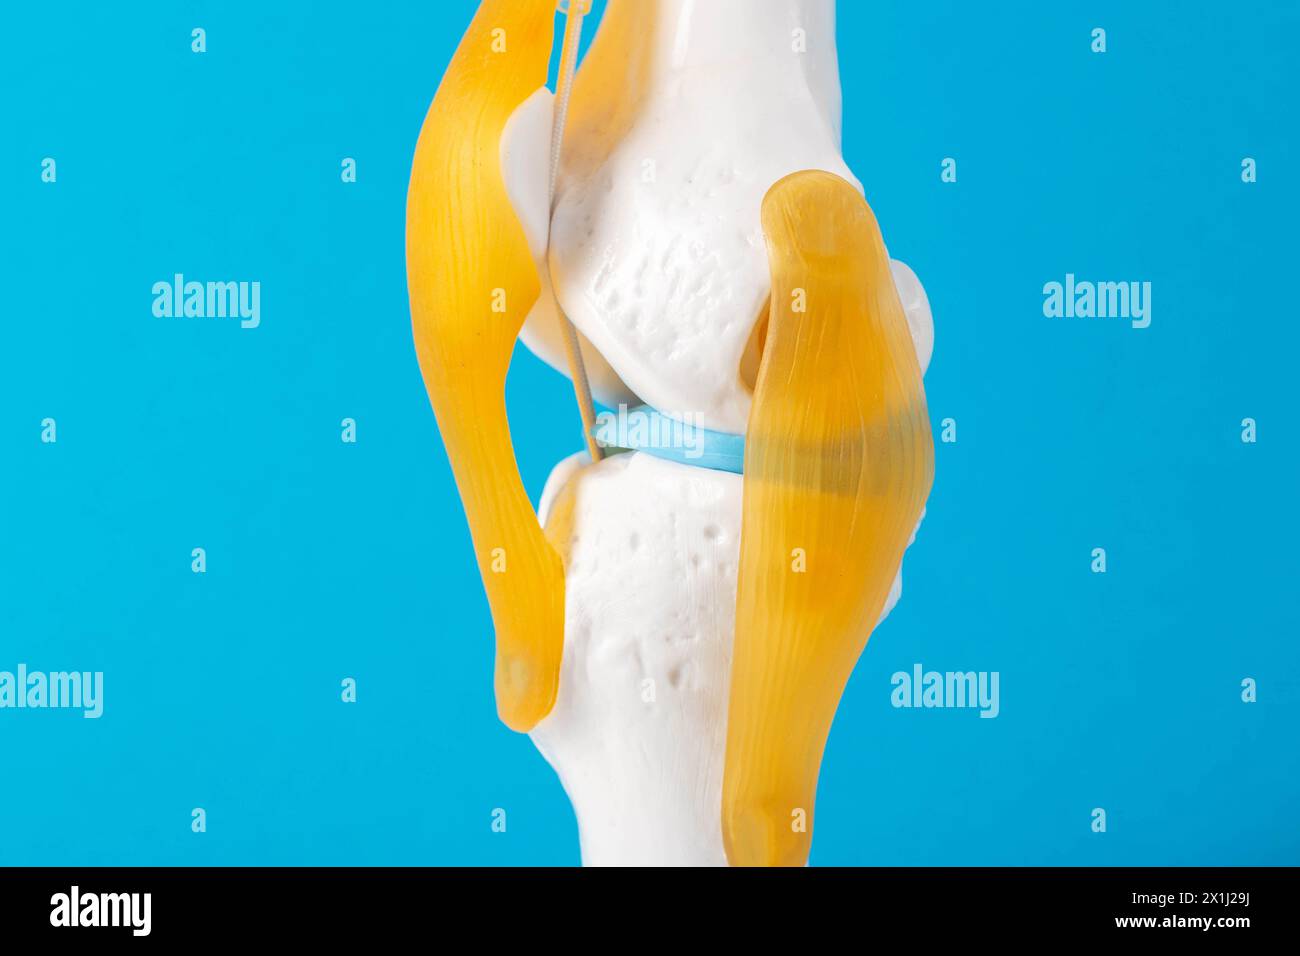 Medical mockup of the knee joint on a blue background, close-up. Concept of knee treatment with arthroscopic surgery. Knee replacement, prosthesis Stock Photo